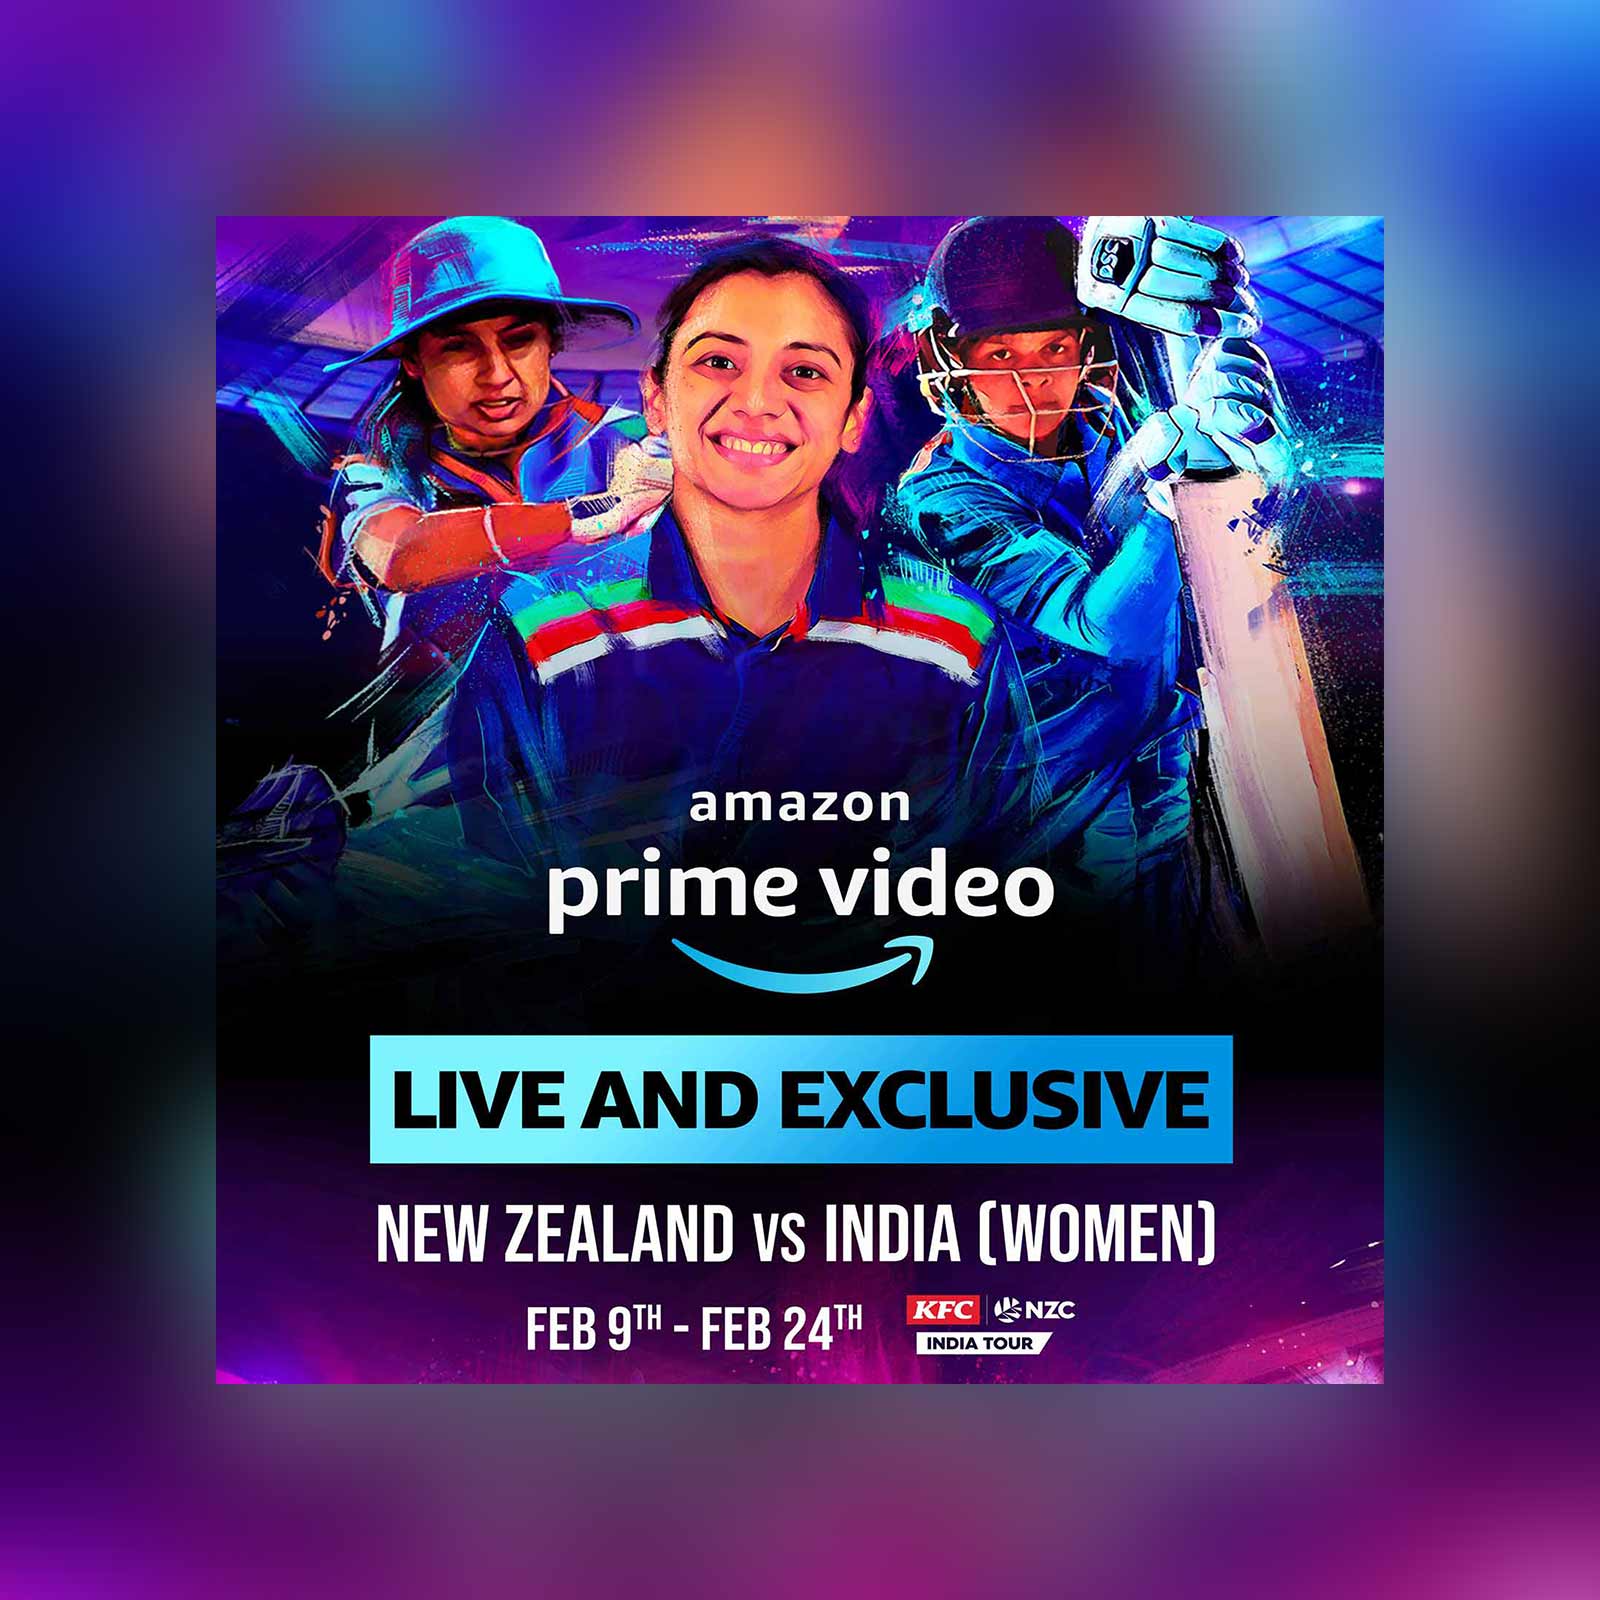 Watch the Indian Womens Cricket Team Take on New Zealand, Live and Exclusive on Amazon Prime Video